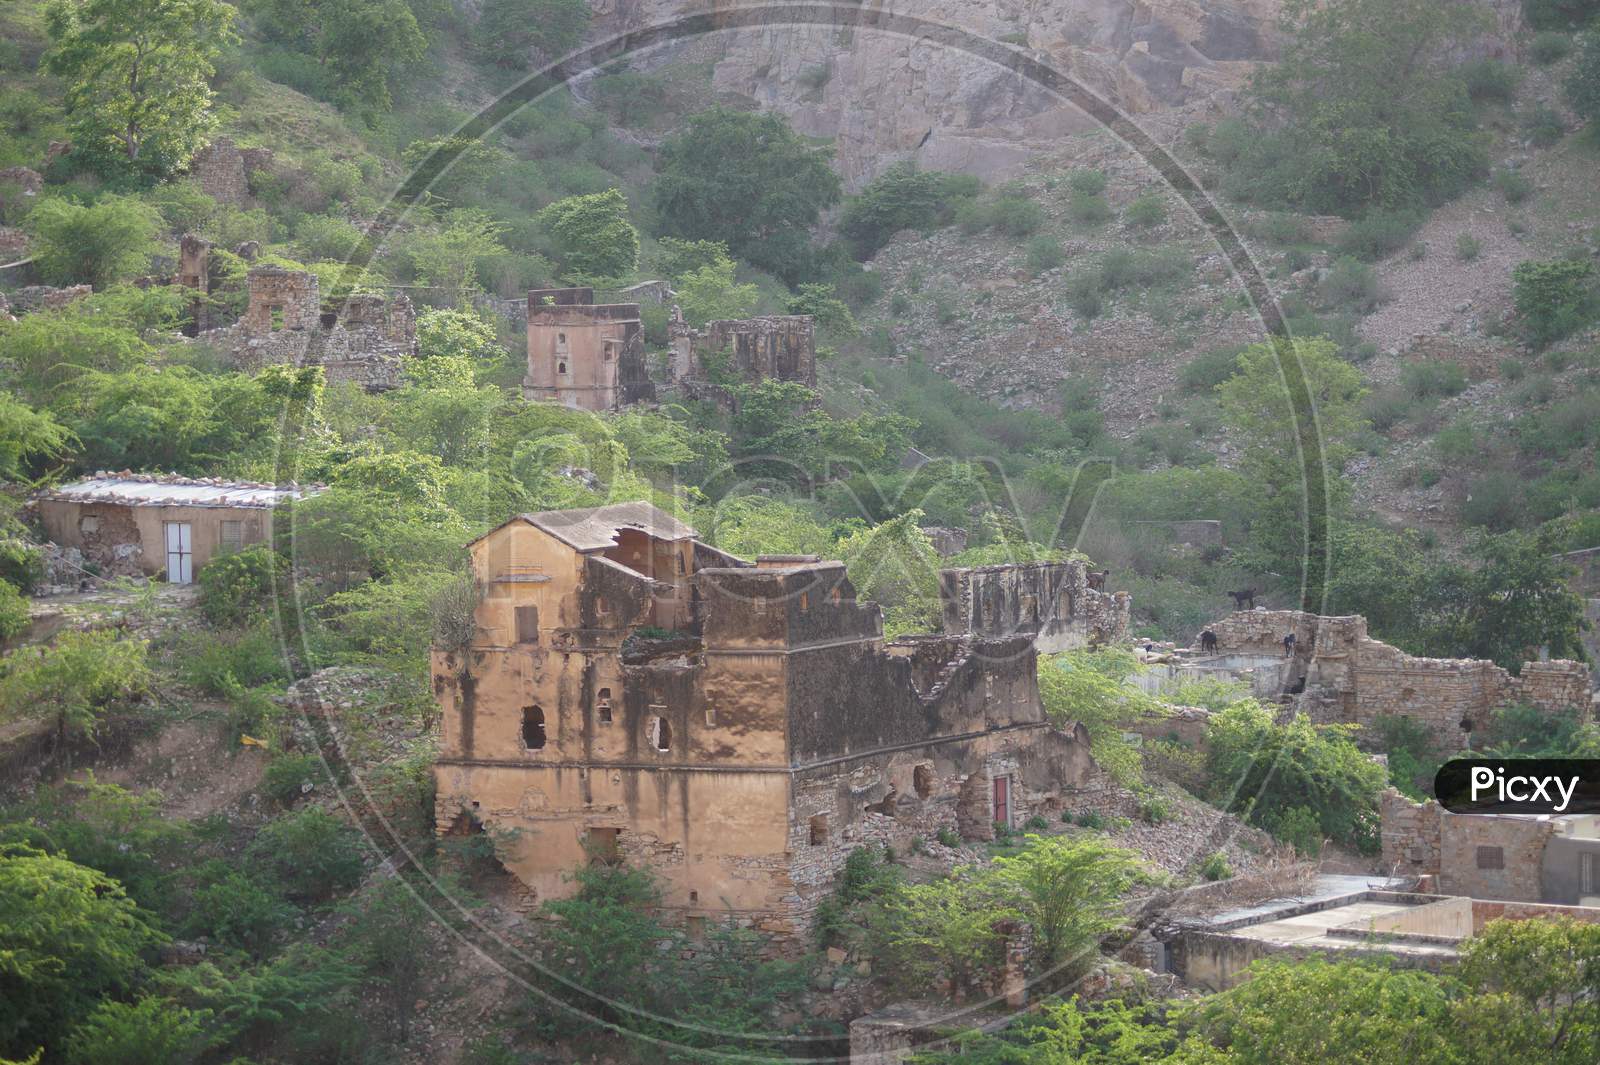 View Of A Damaged House In Jaipur India